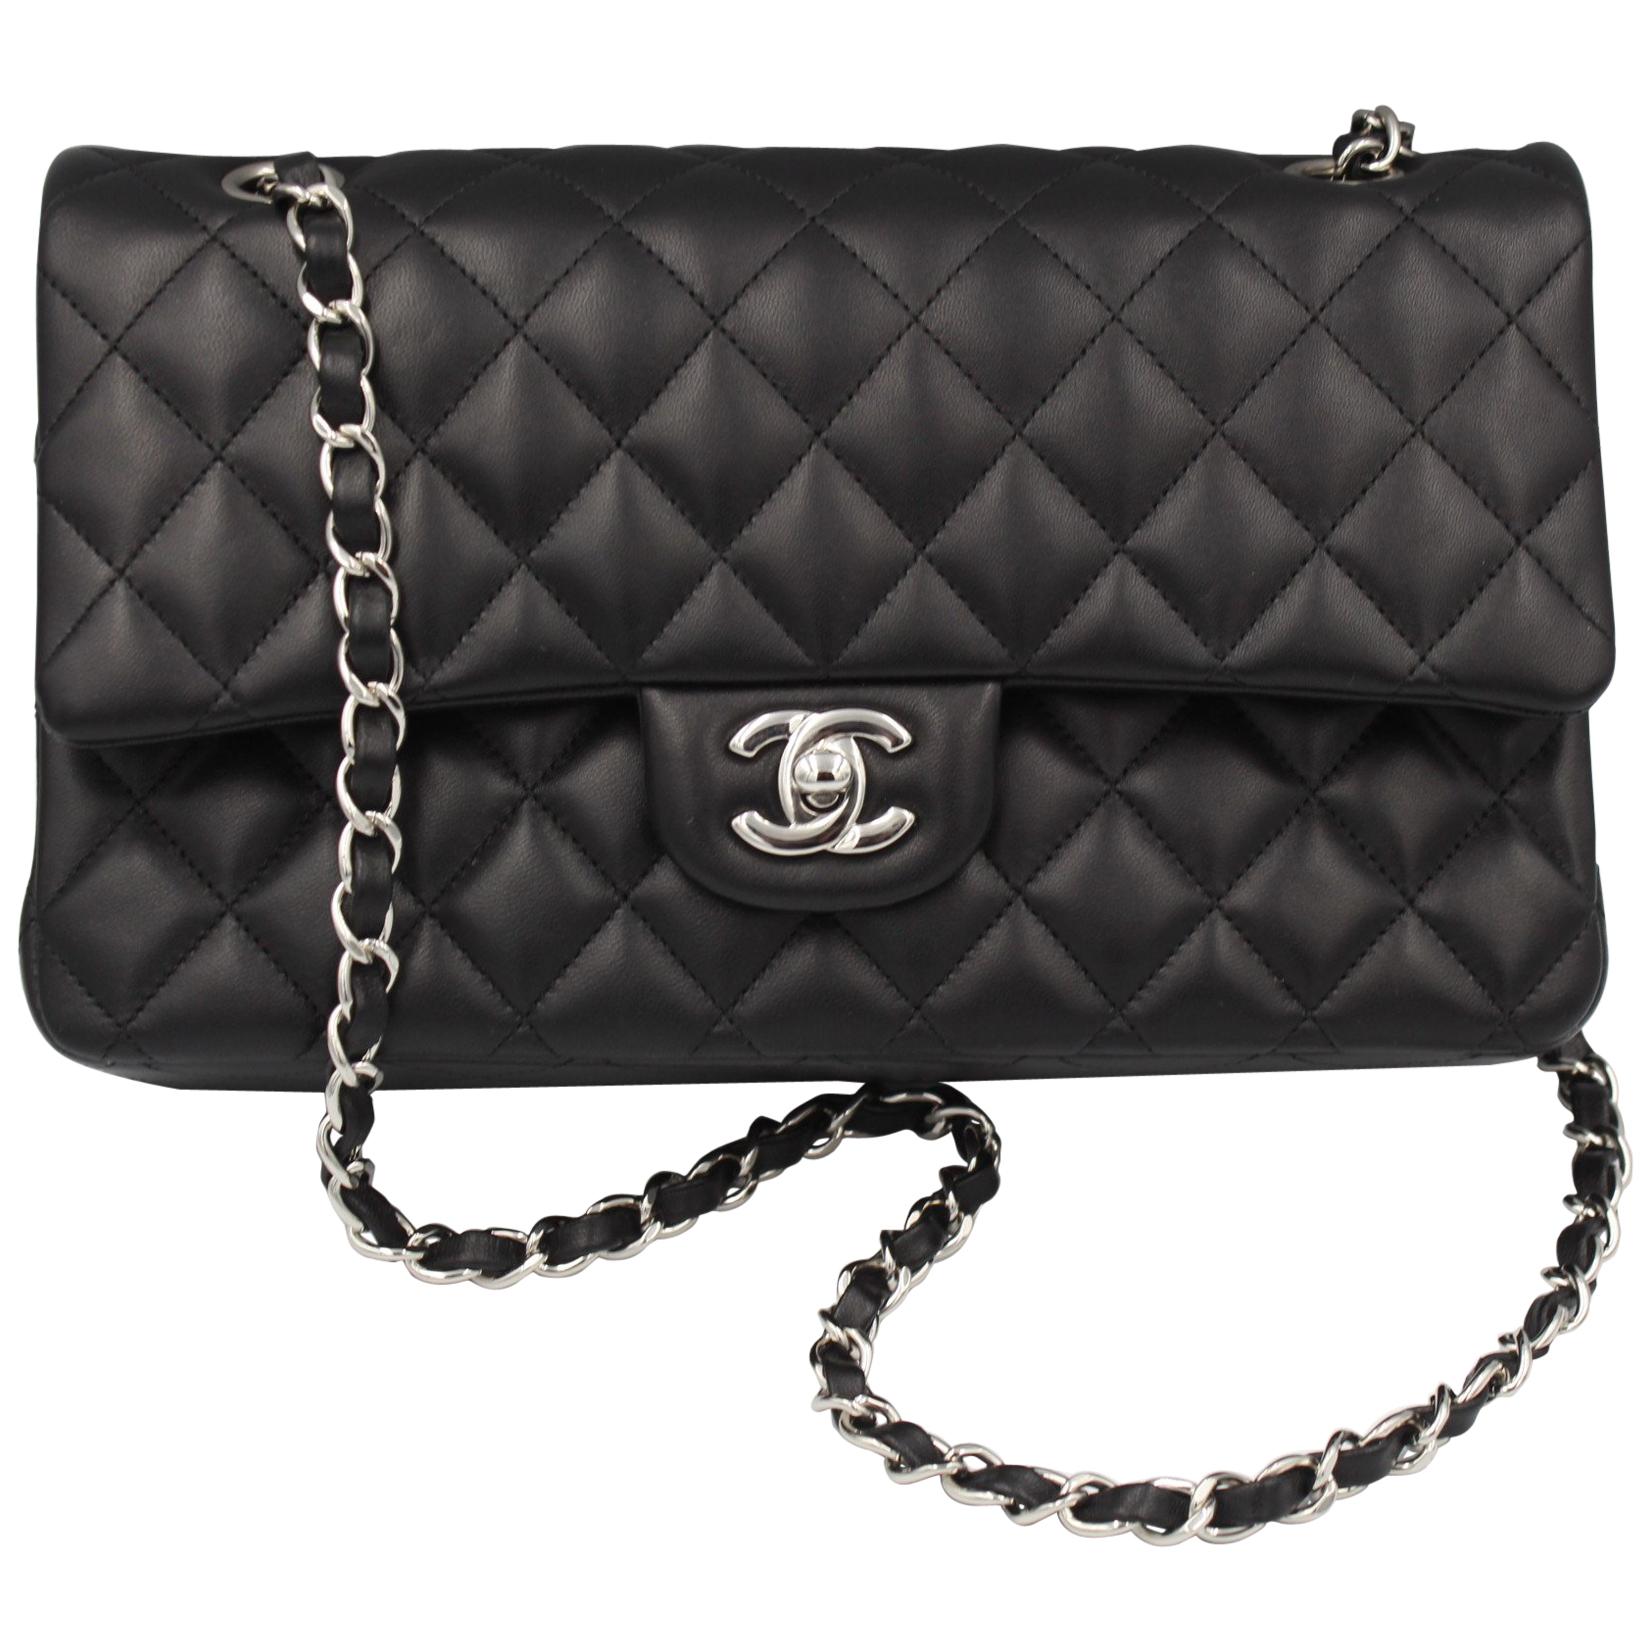 Chanel Timeless Bag in Black Lambskin Leather and Silver Hardware